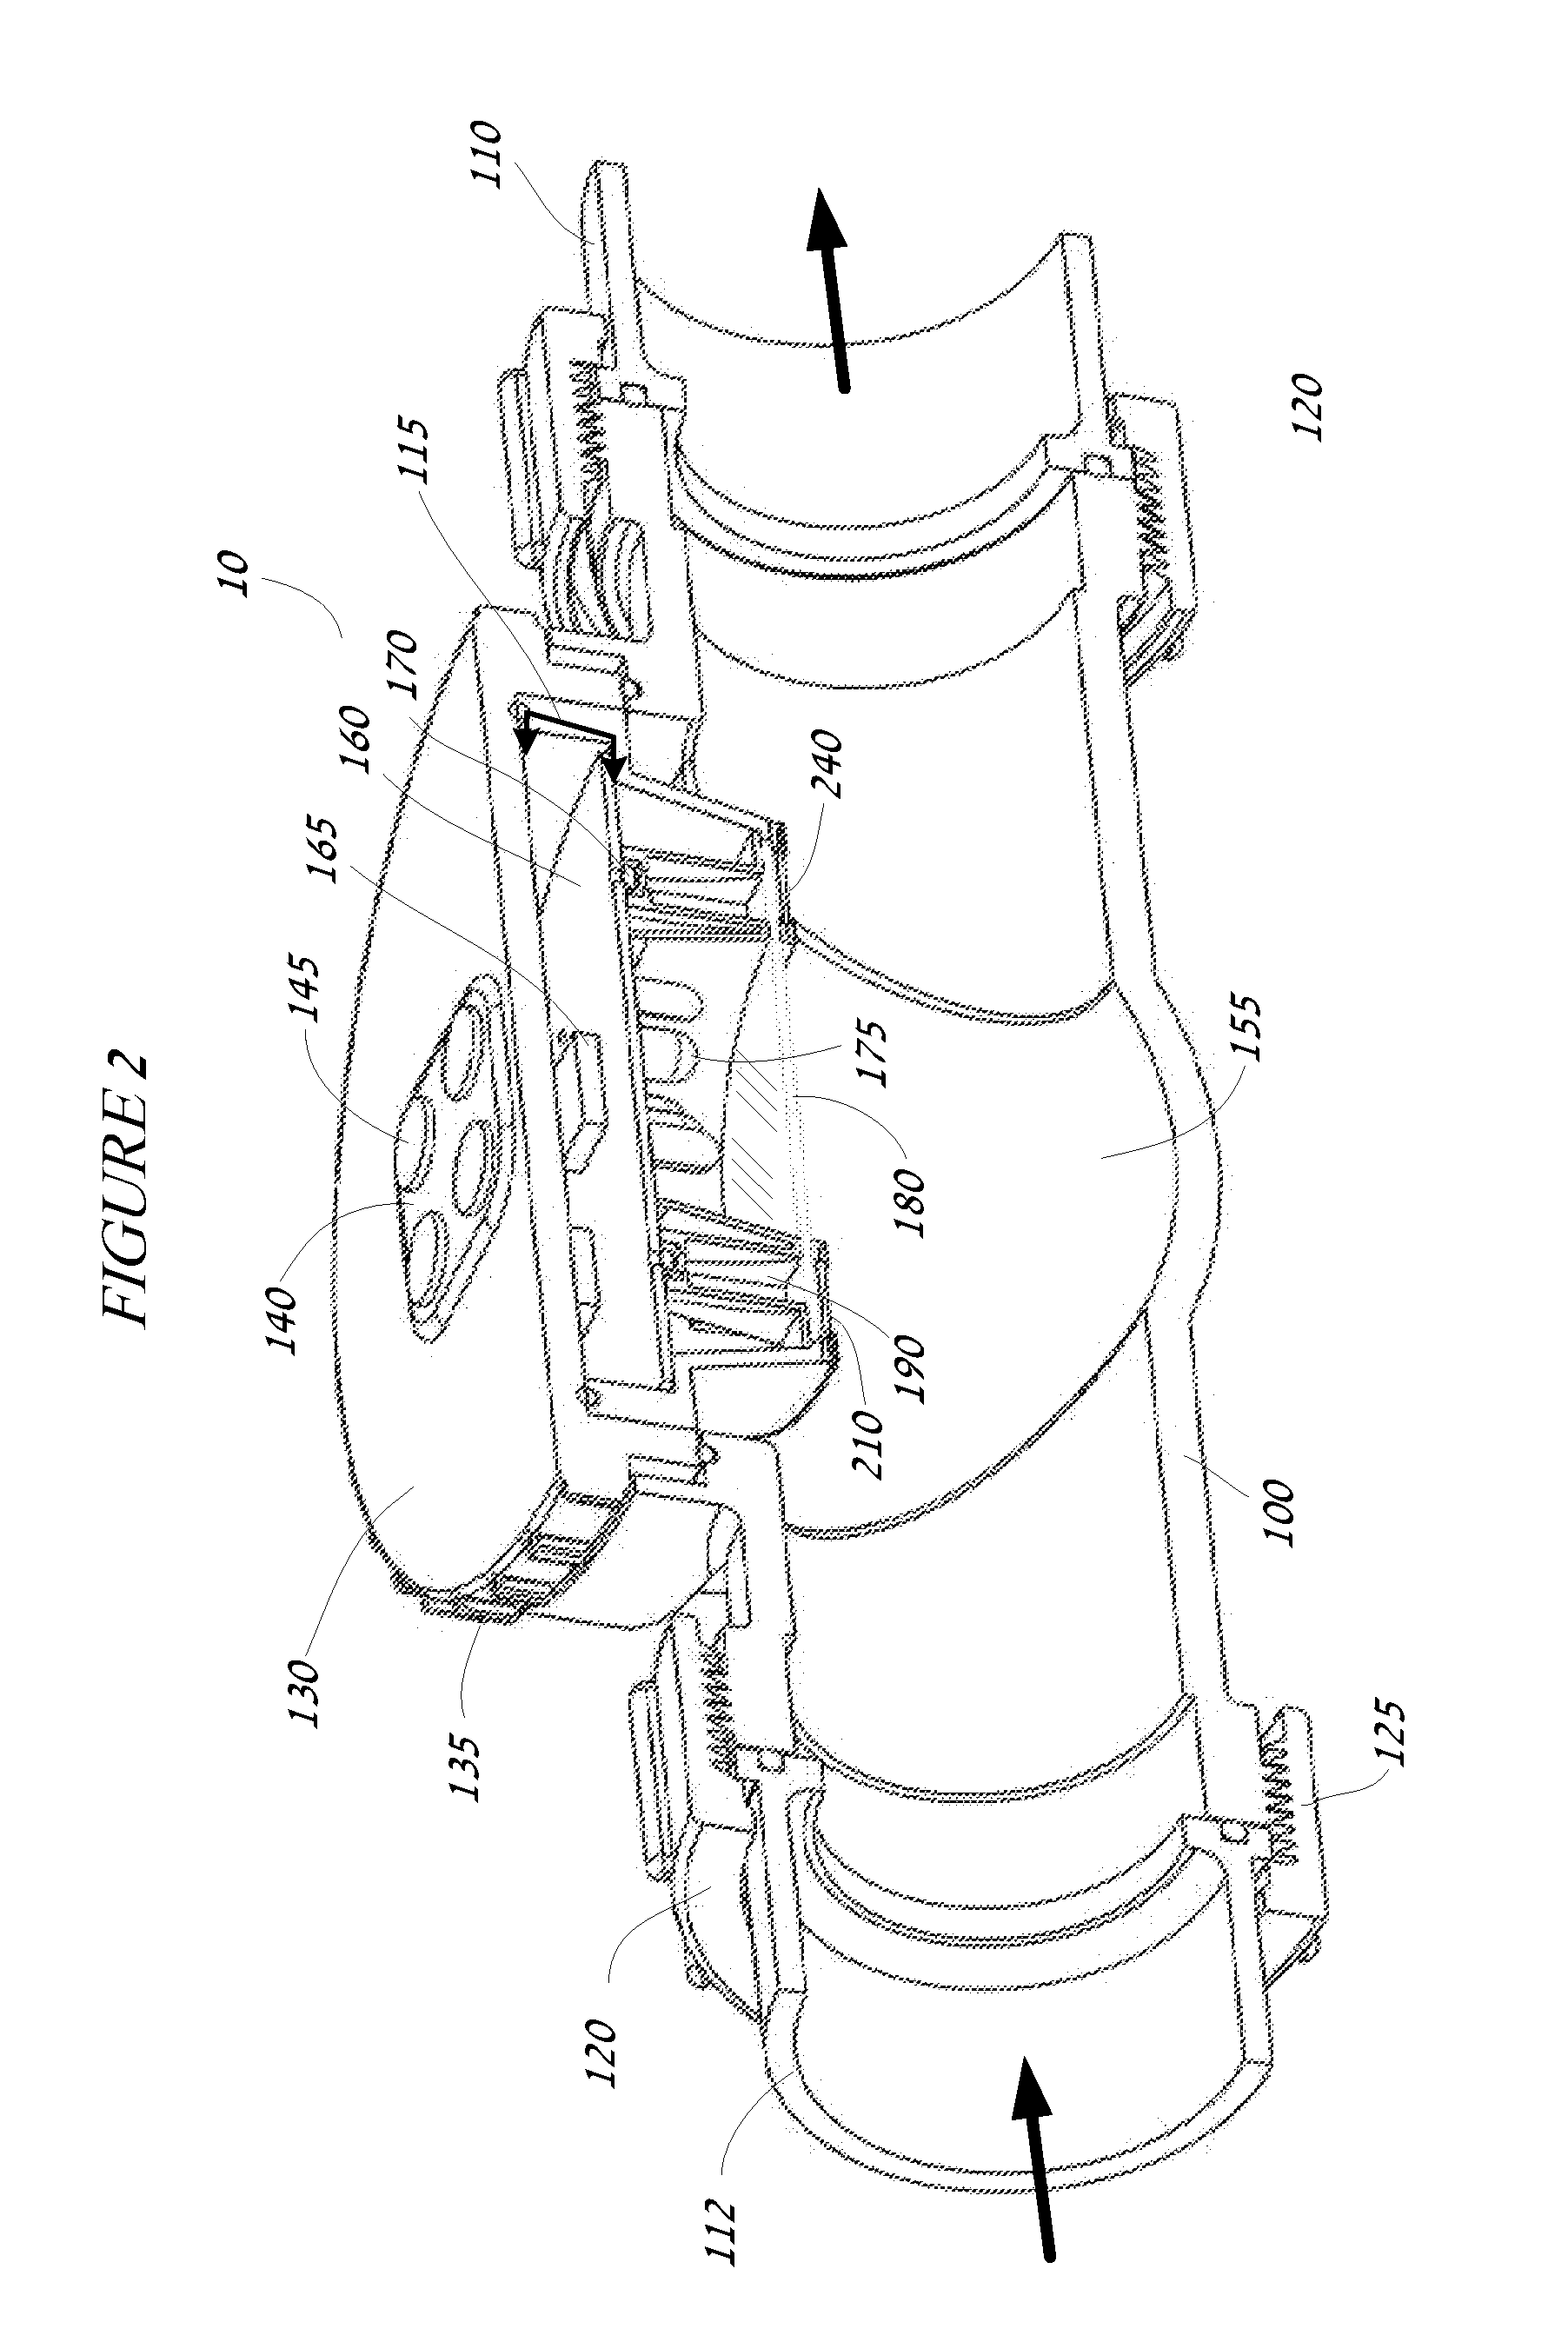 Chemical sensing apparatus having multiple immobilized reagents